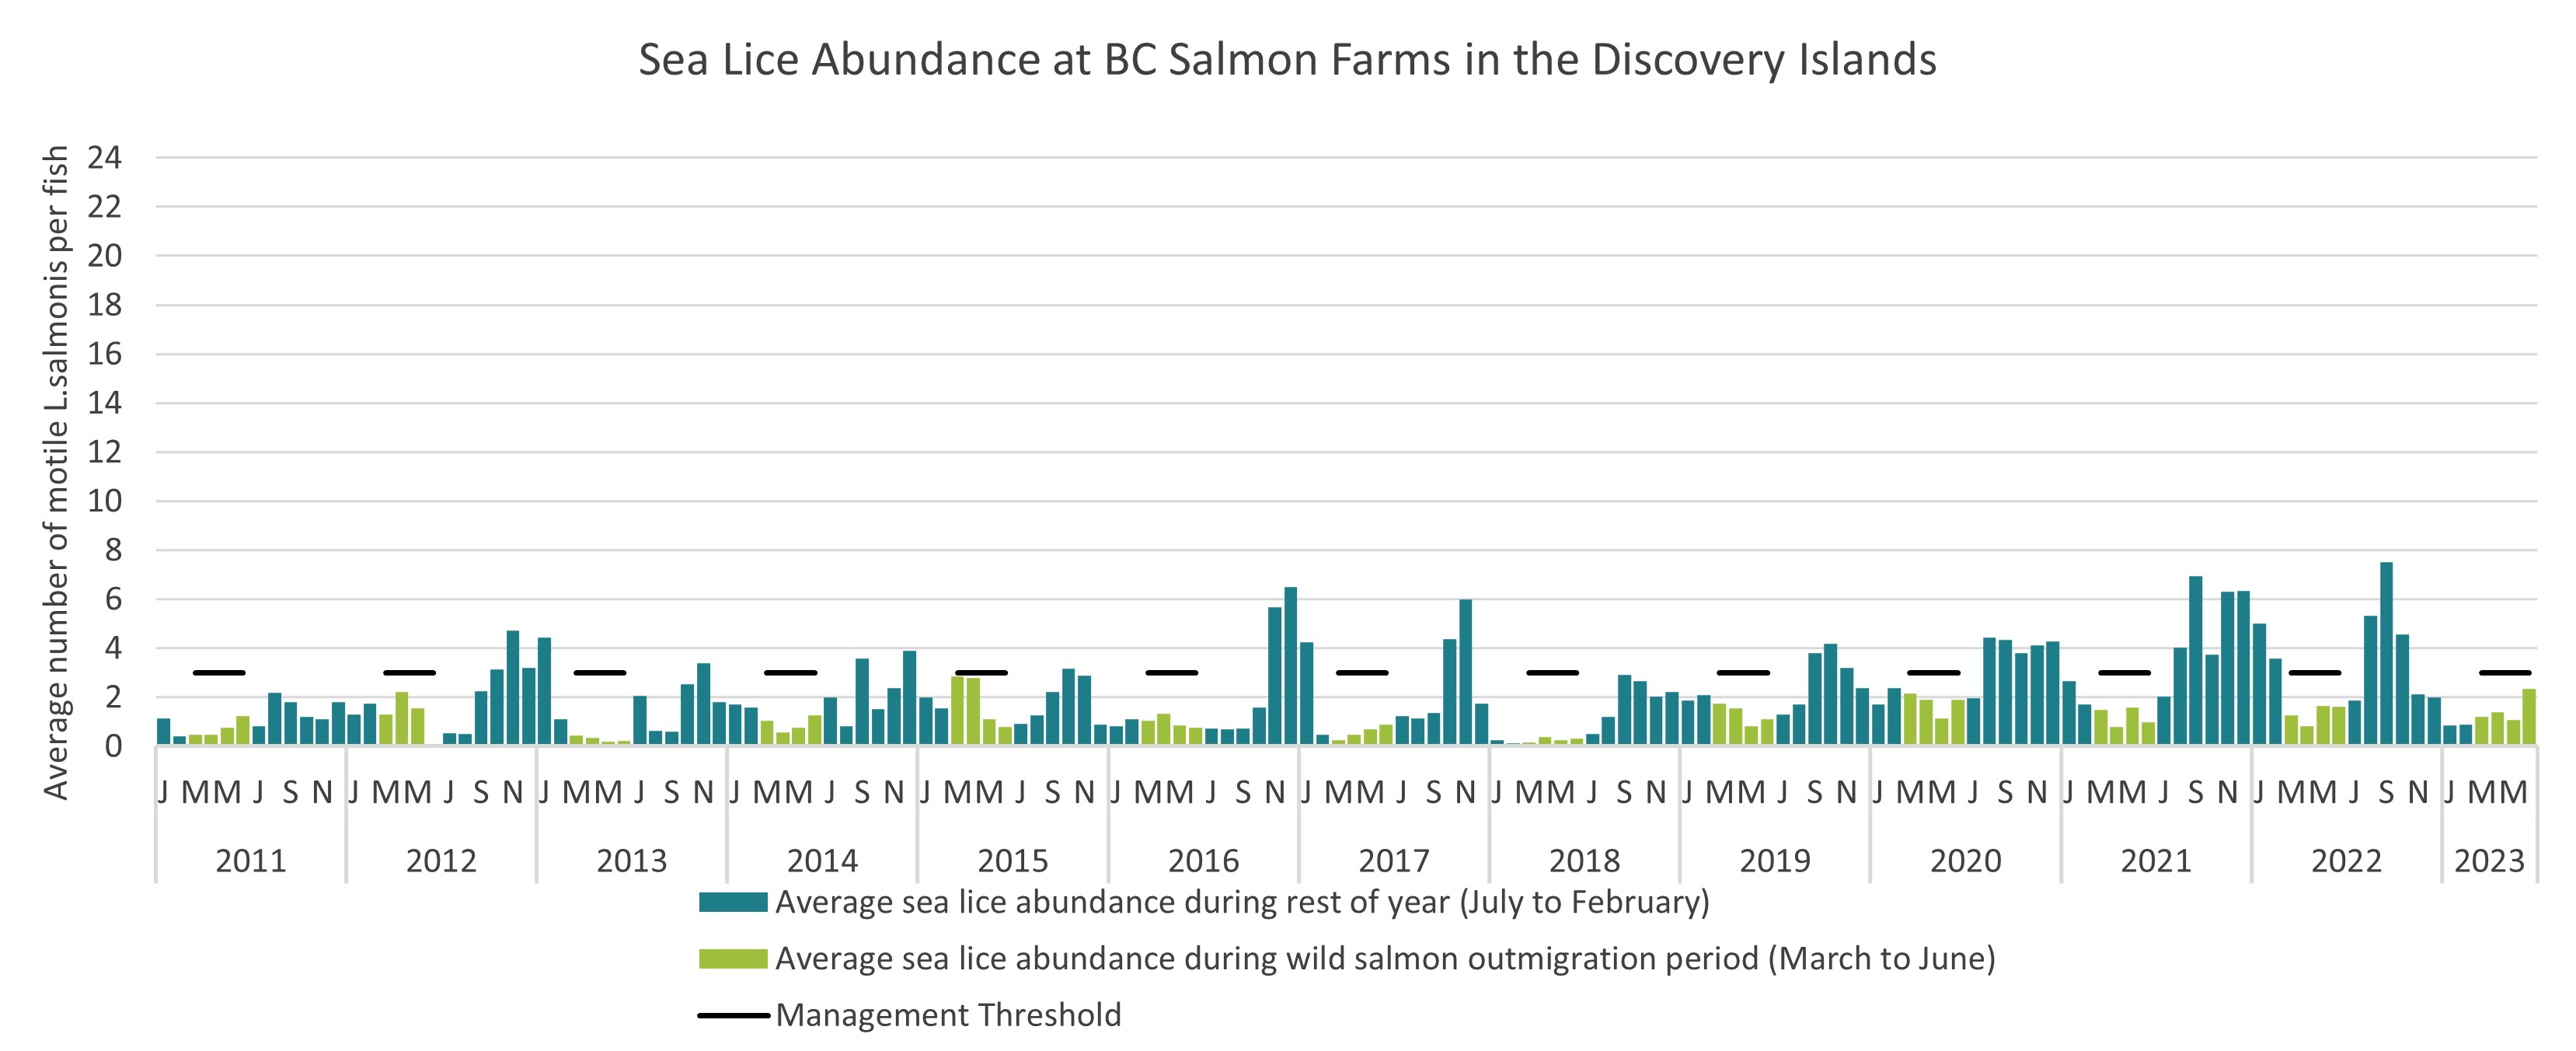 Sea Lice Abundance at BC Salmon Farms in the Discovery Islands, 2011 to 2023